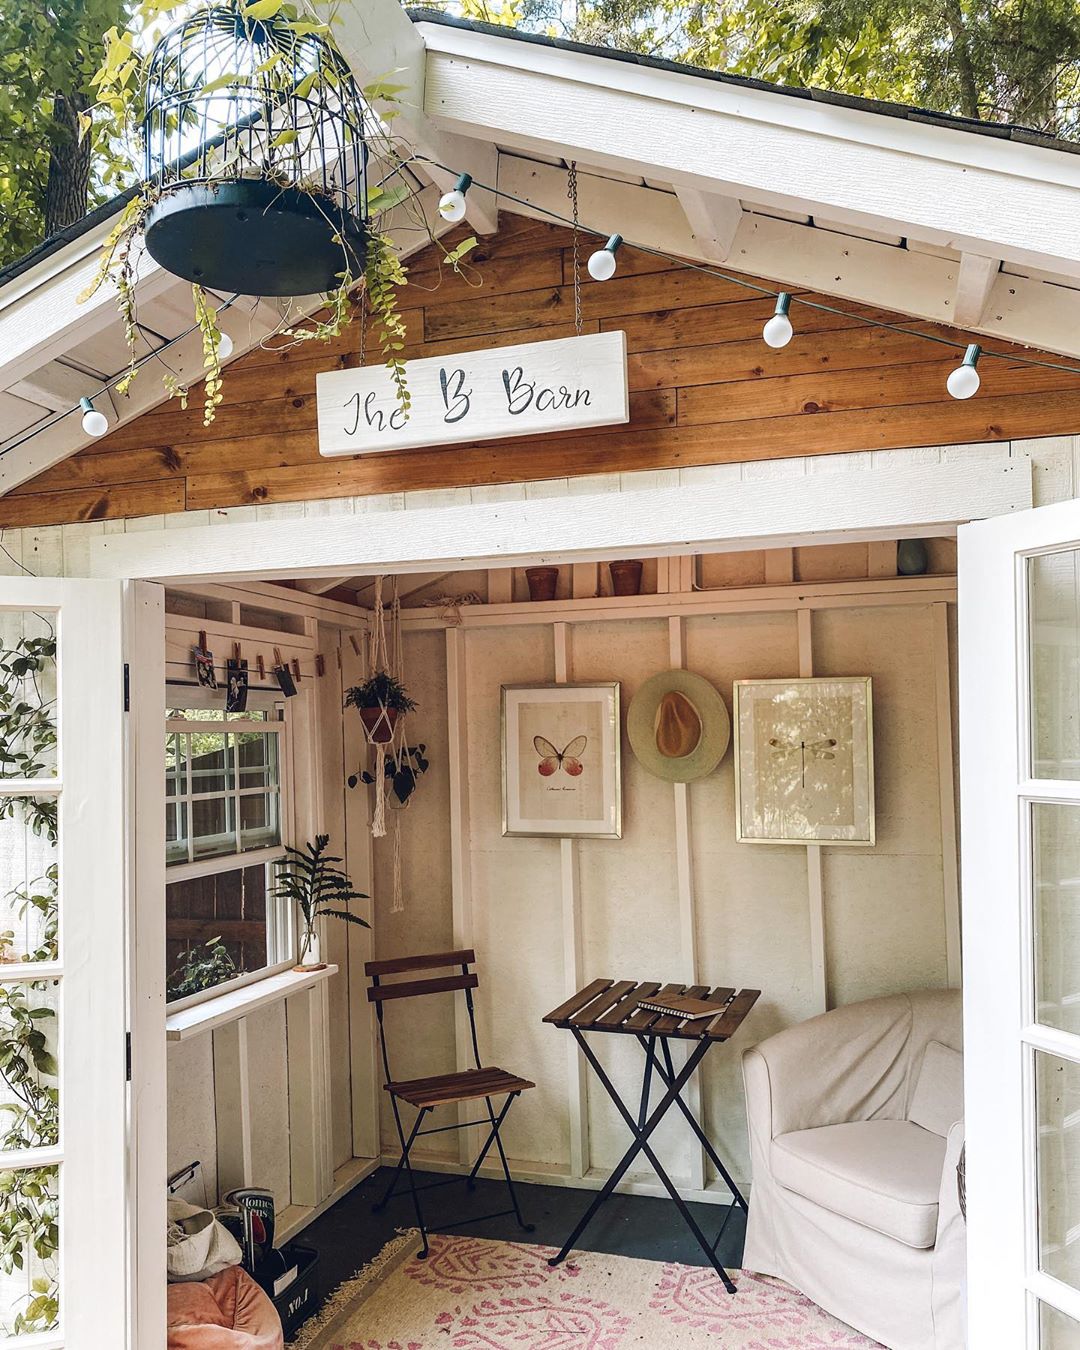 Small She Shed with a Soft Corner Chair and Sign Above the Door. Photo by Instagram user @theeverhopefulgardener